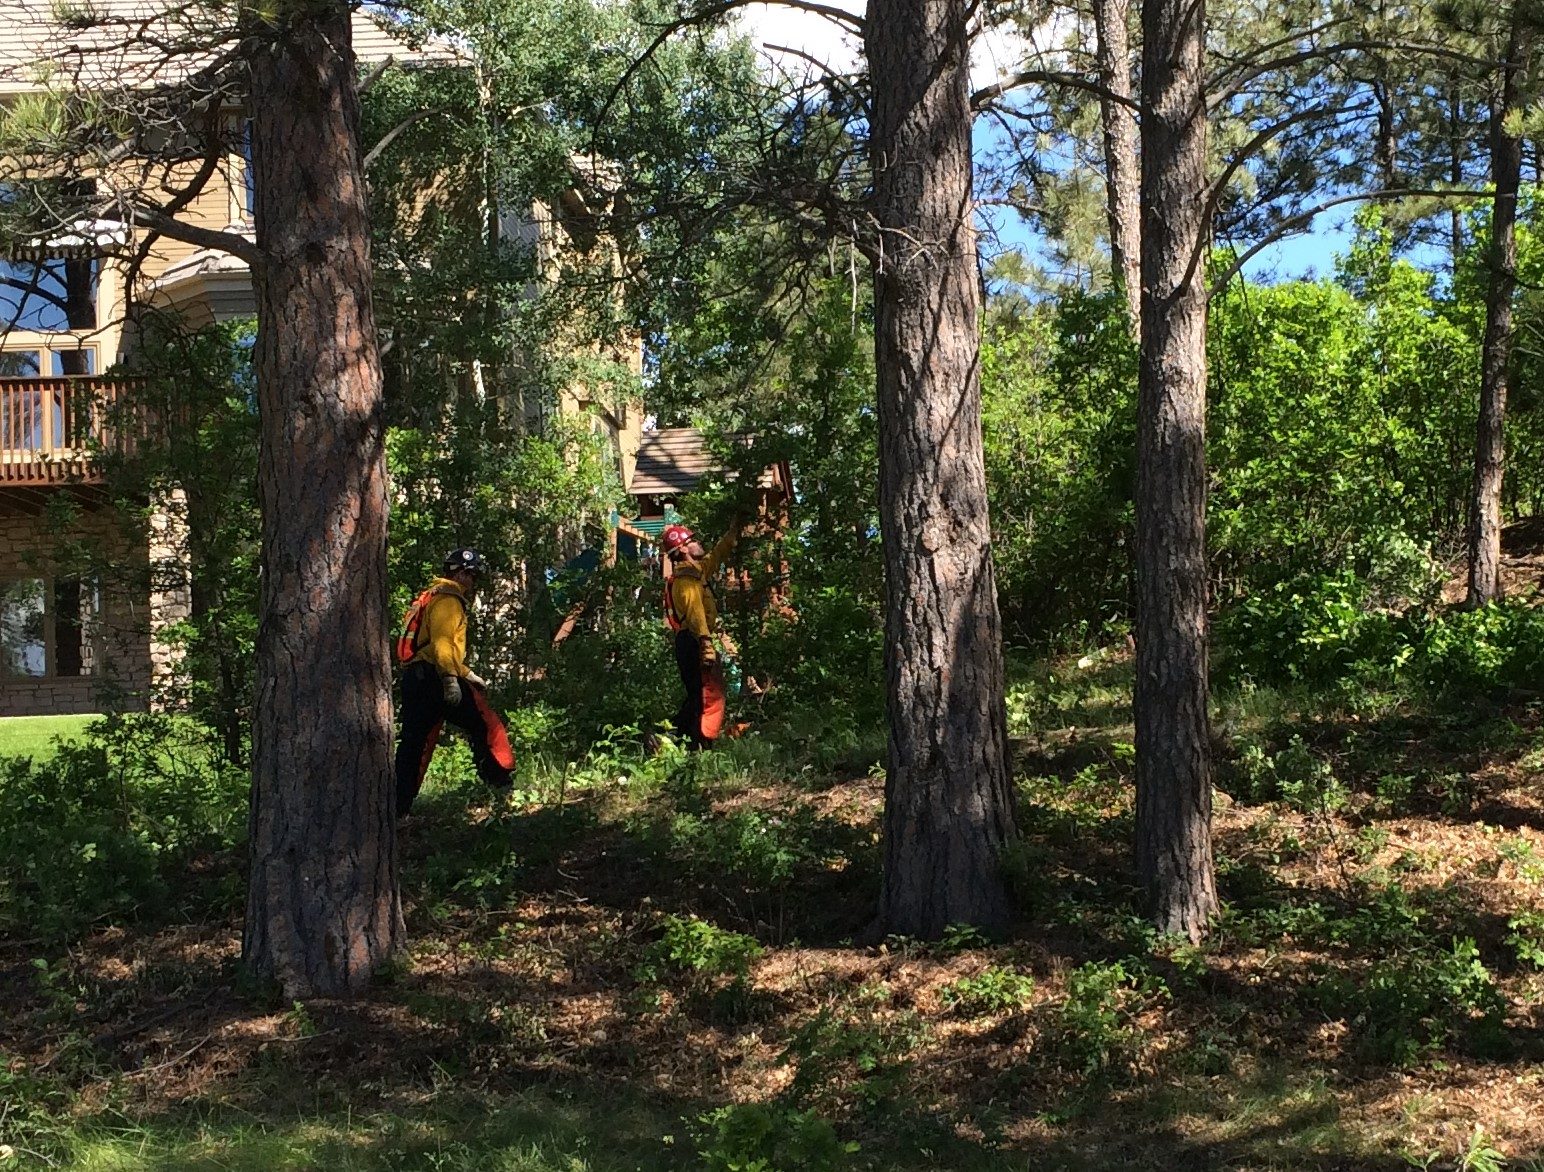 Image of South Metro Fire Rescue clearing brush in a tree area